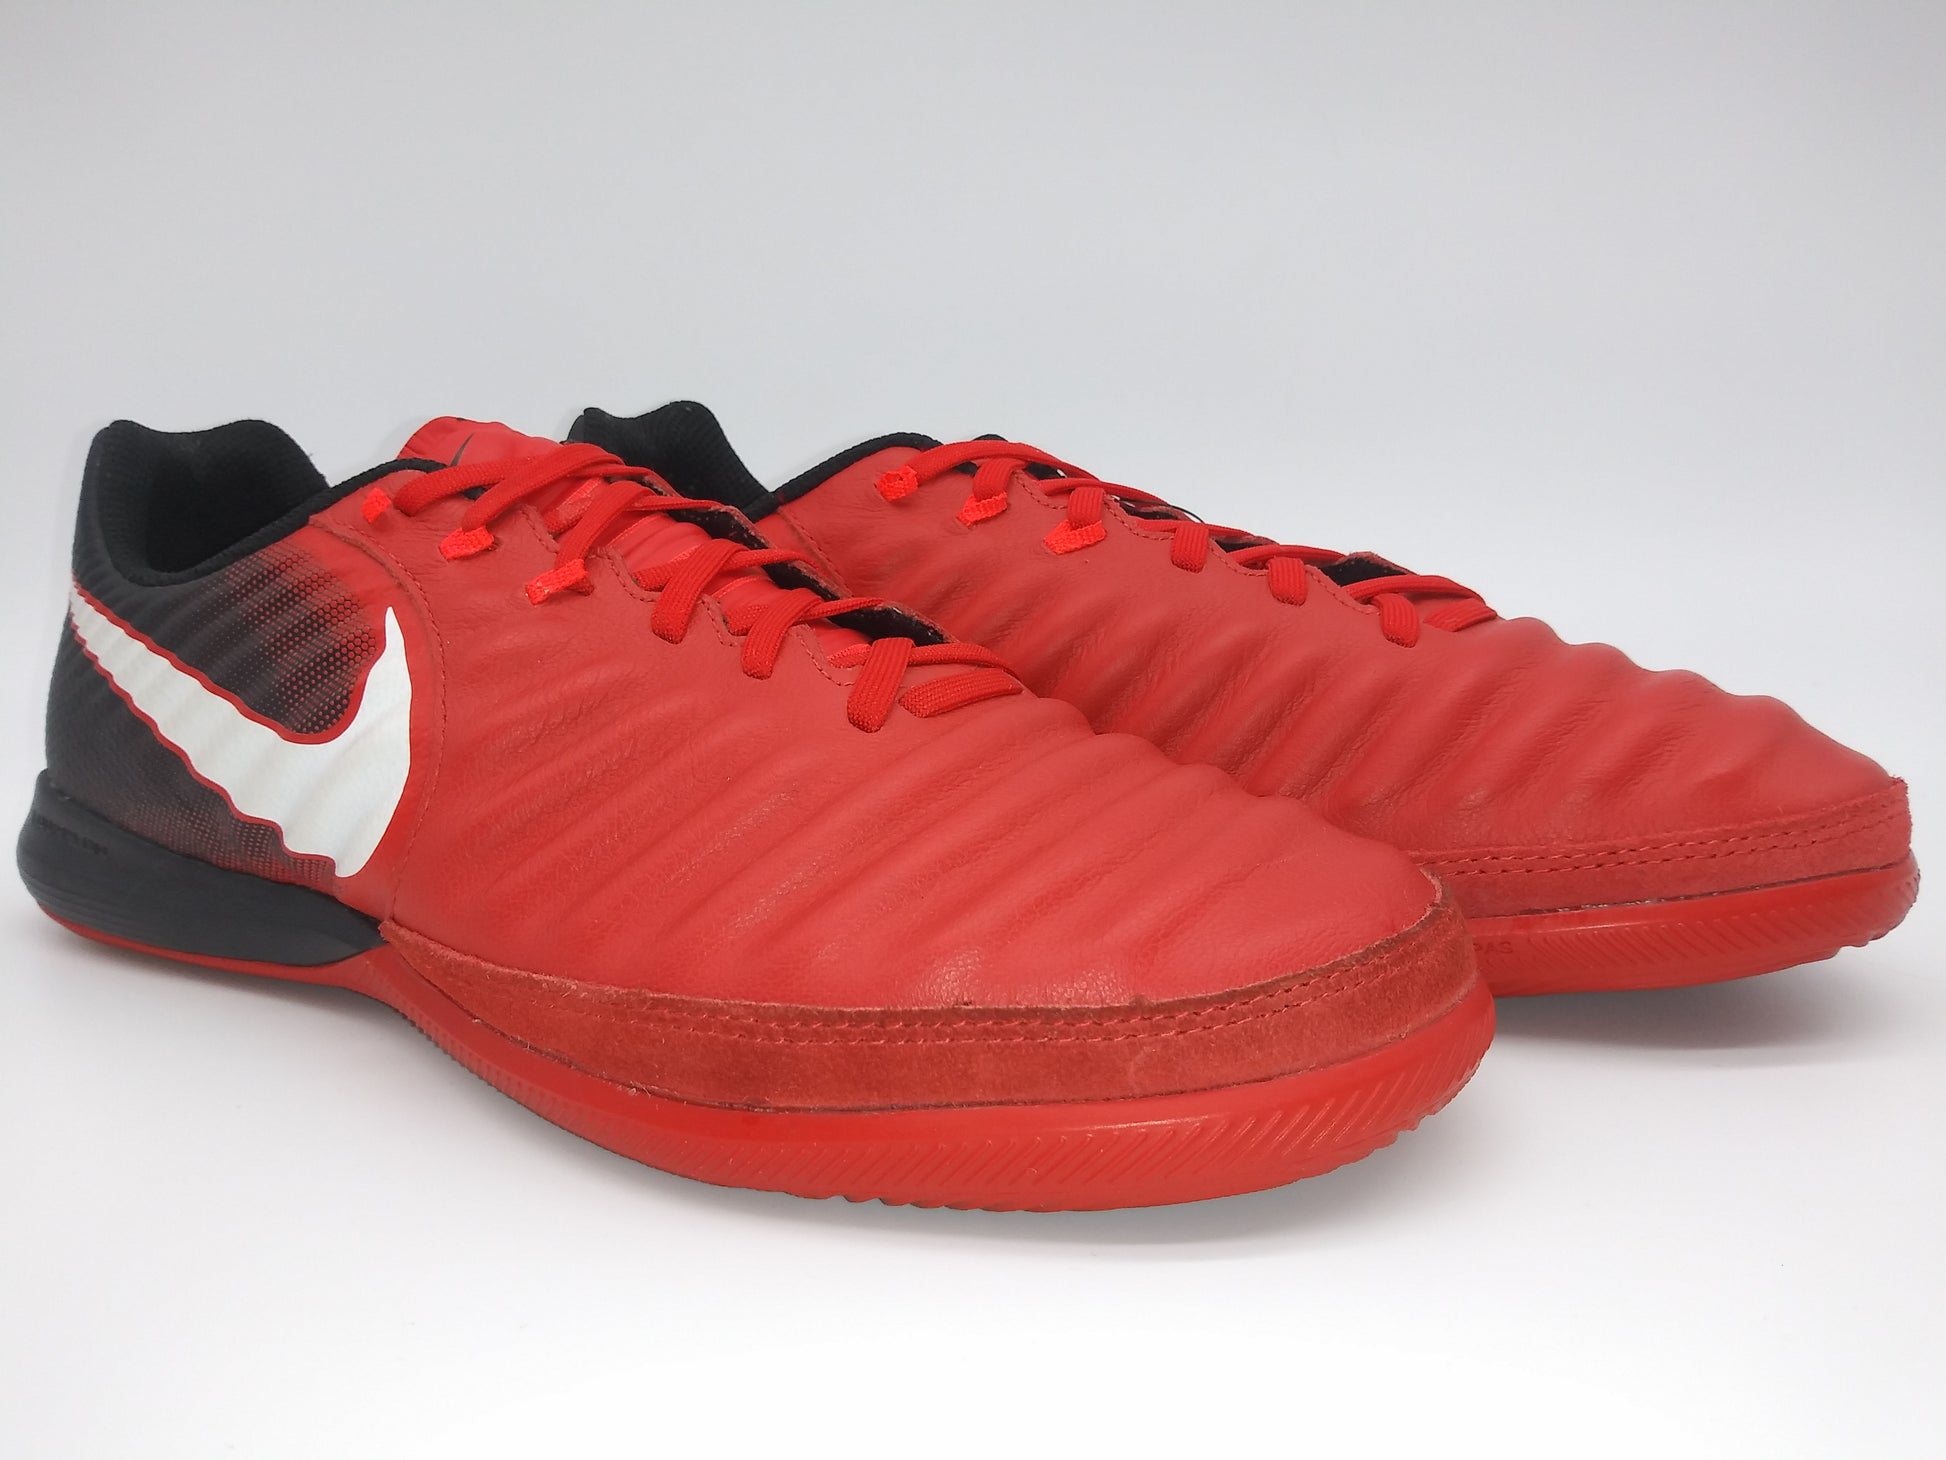 Accor Mm overschrijving Nike Tiempox Finale IC Red – Villegas Footwear